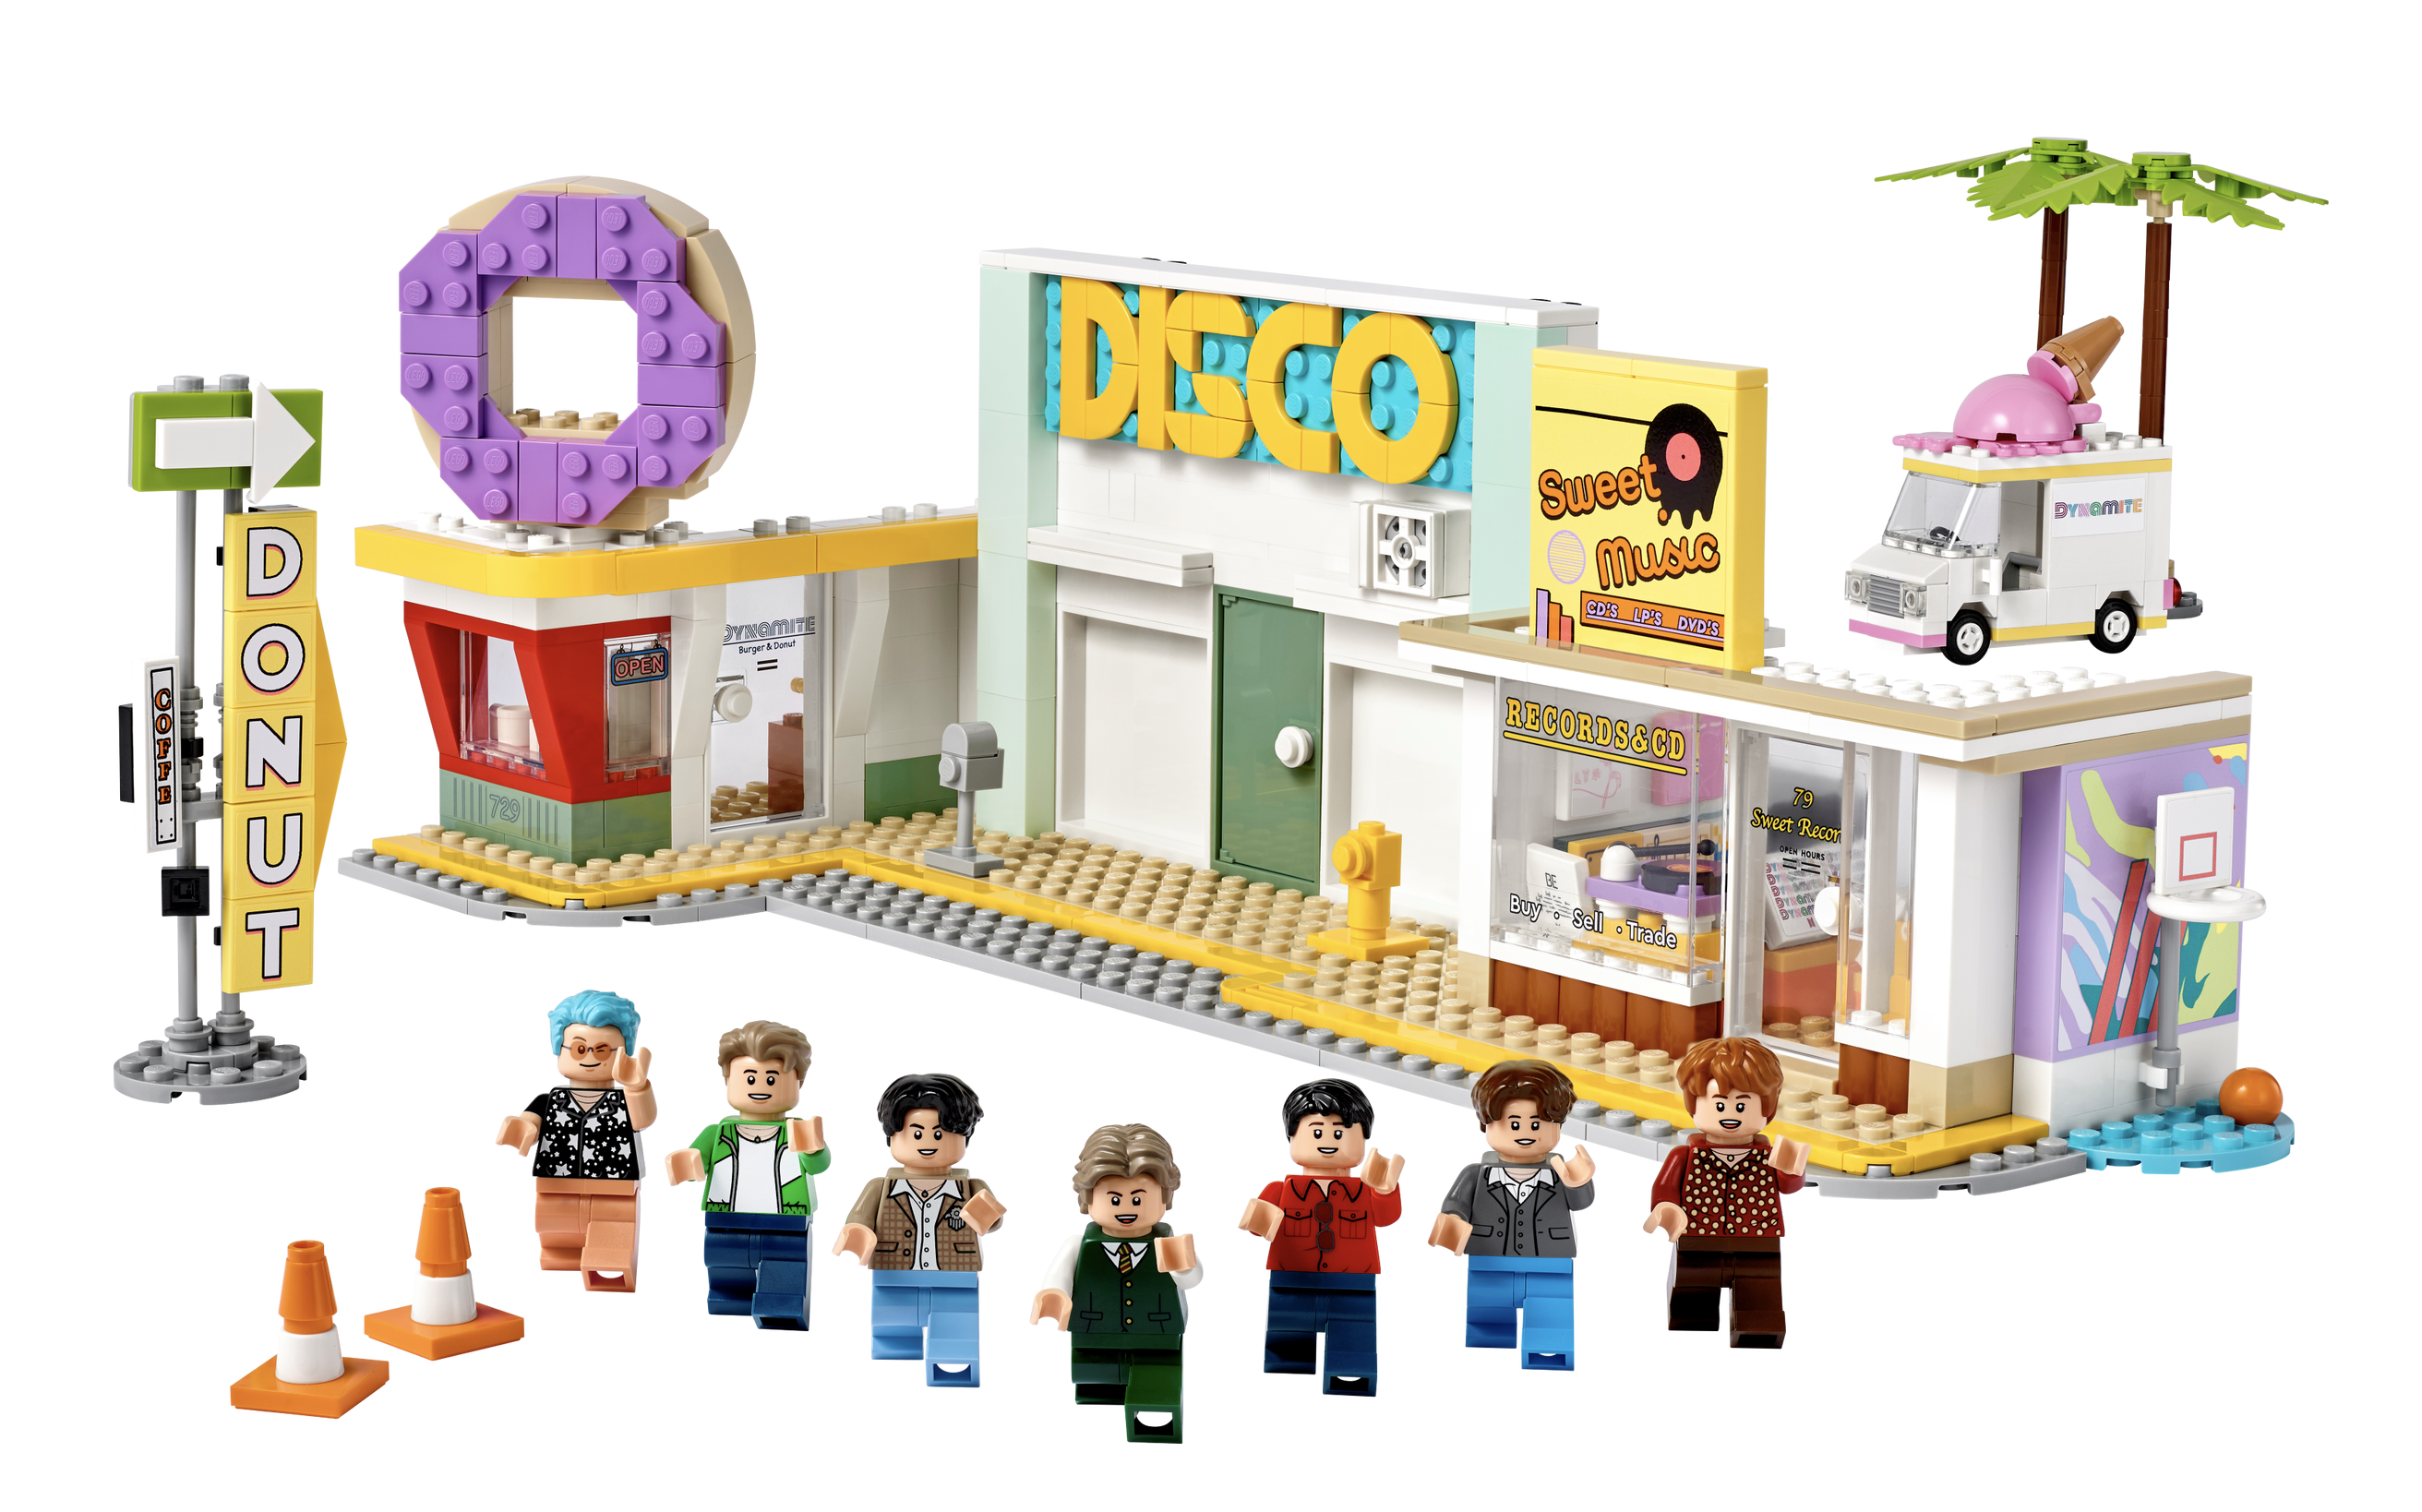 LEGO Ideas from famous K-Pop band BTS makes its debut